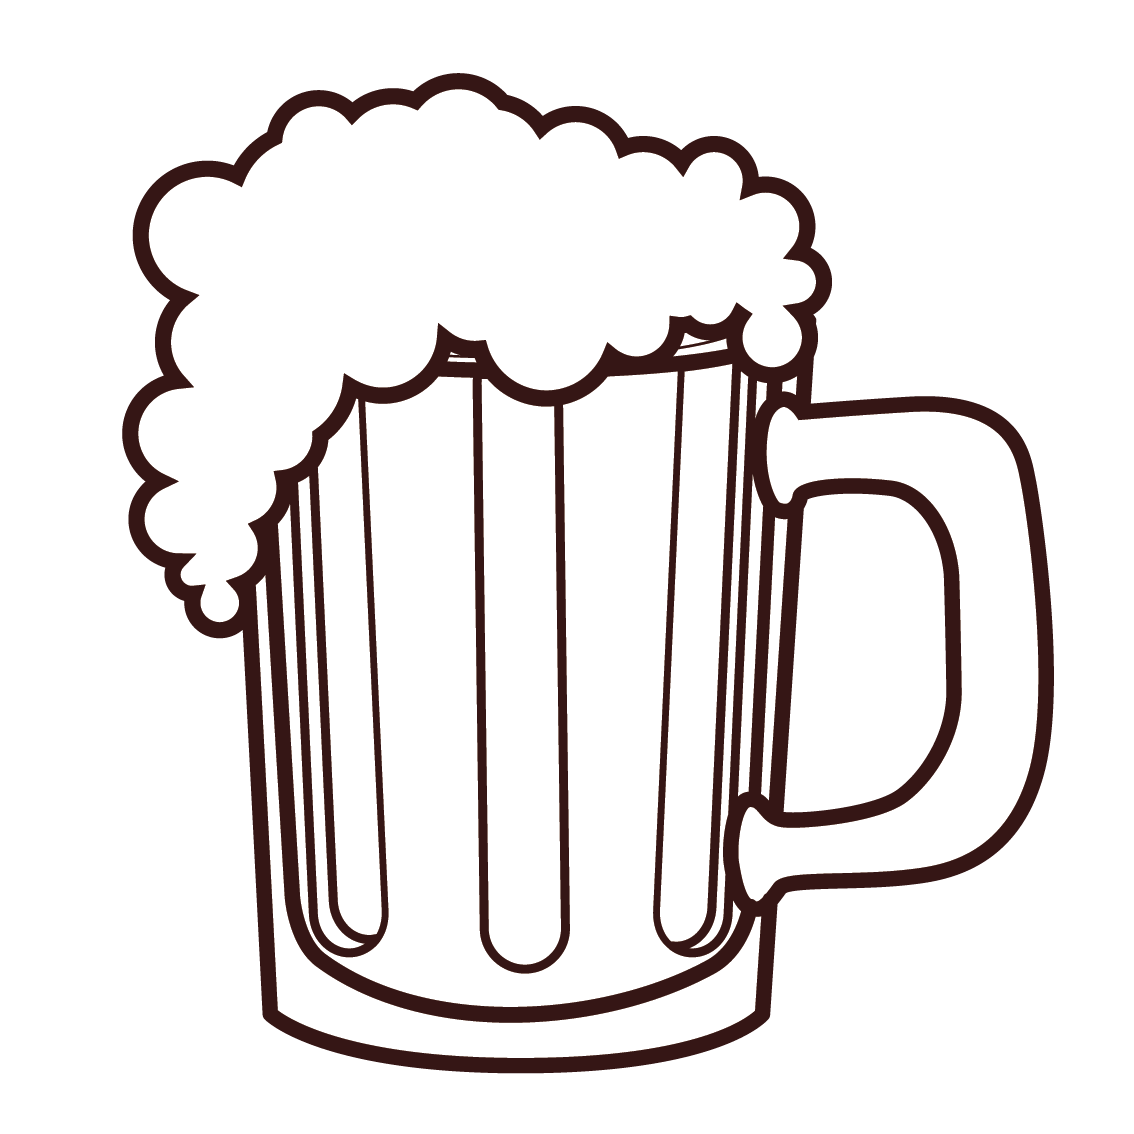 Coffee Cup Pitcher Mug Euclidean Beer Vector Clipart